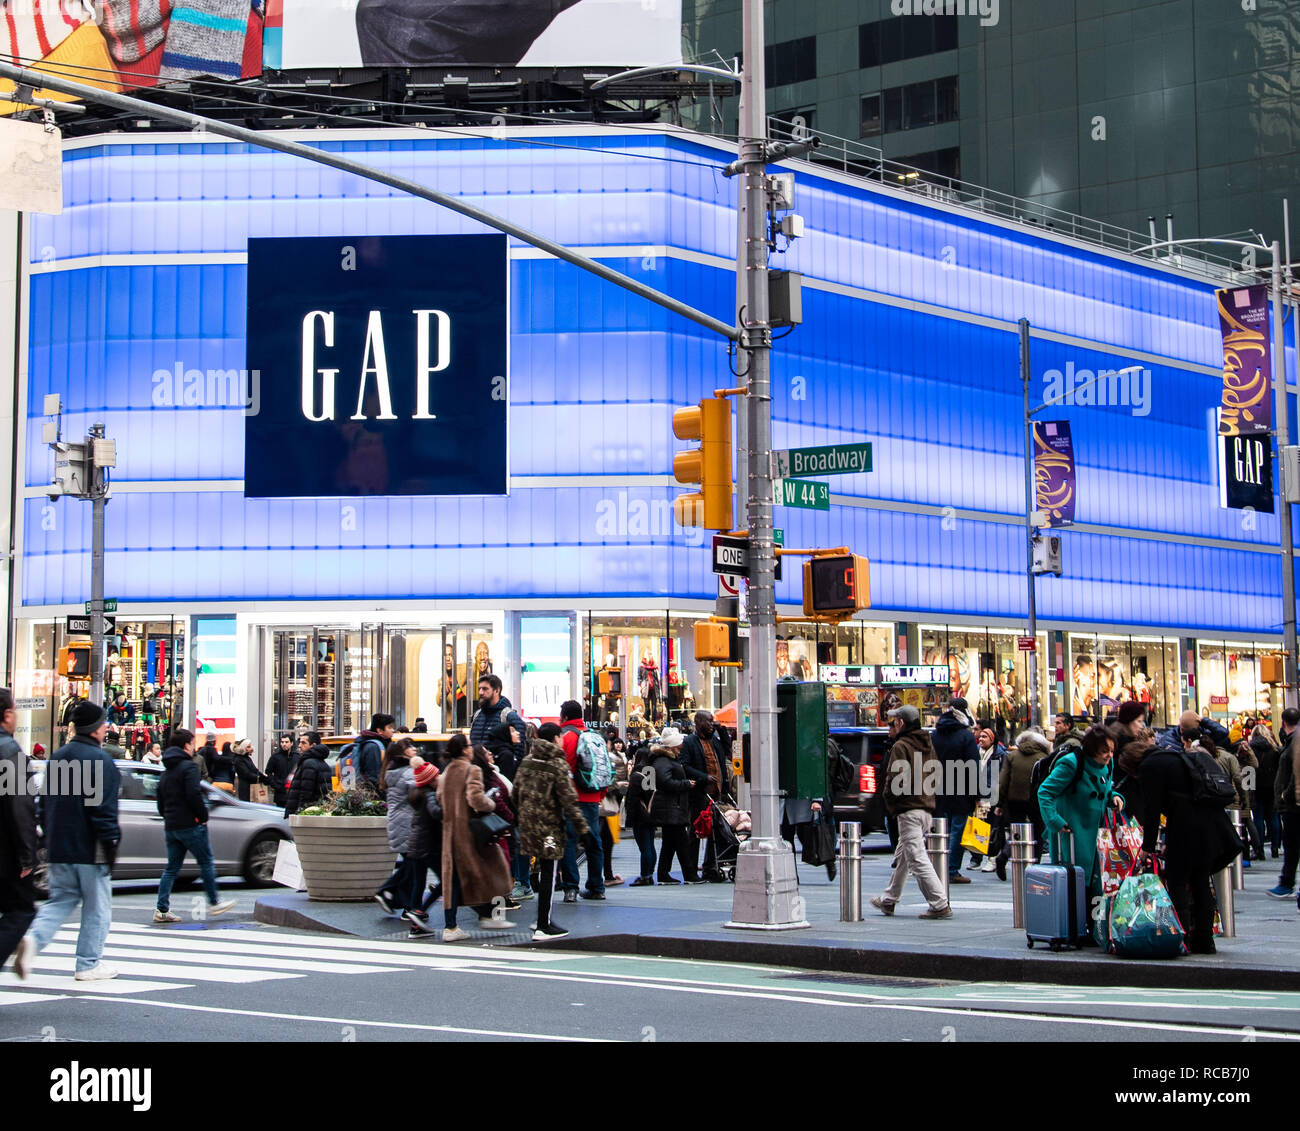 New York City, United States - November 17 2018:   The neon lit frontage of the Gap clothing store on the corner of Boradway and  West 44th Street Stock Photo